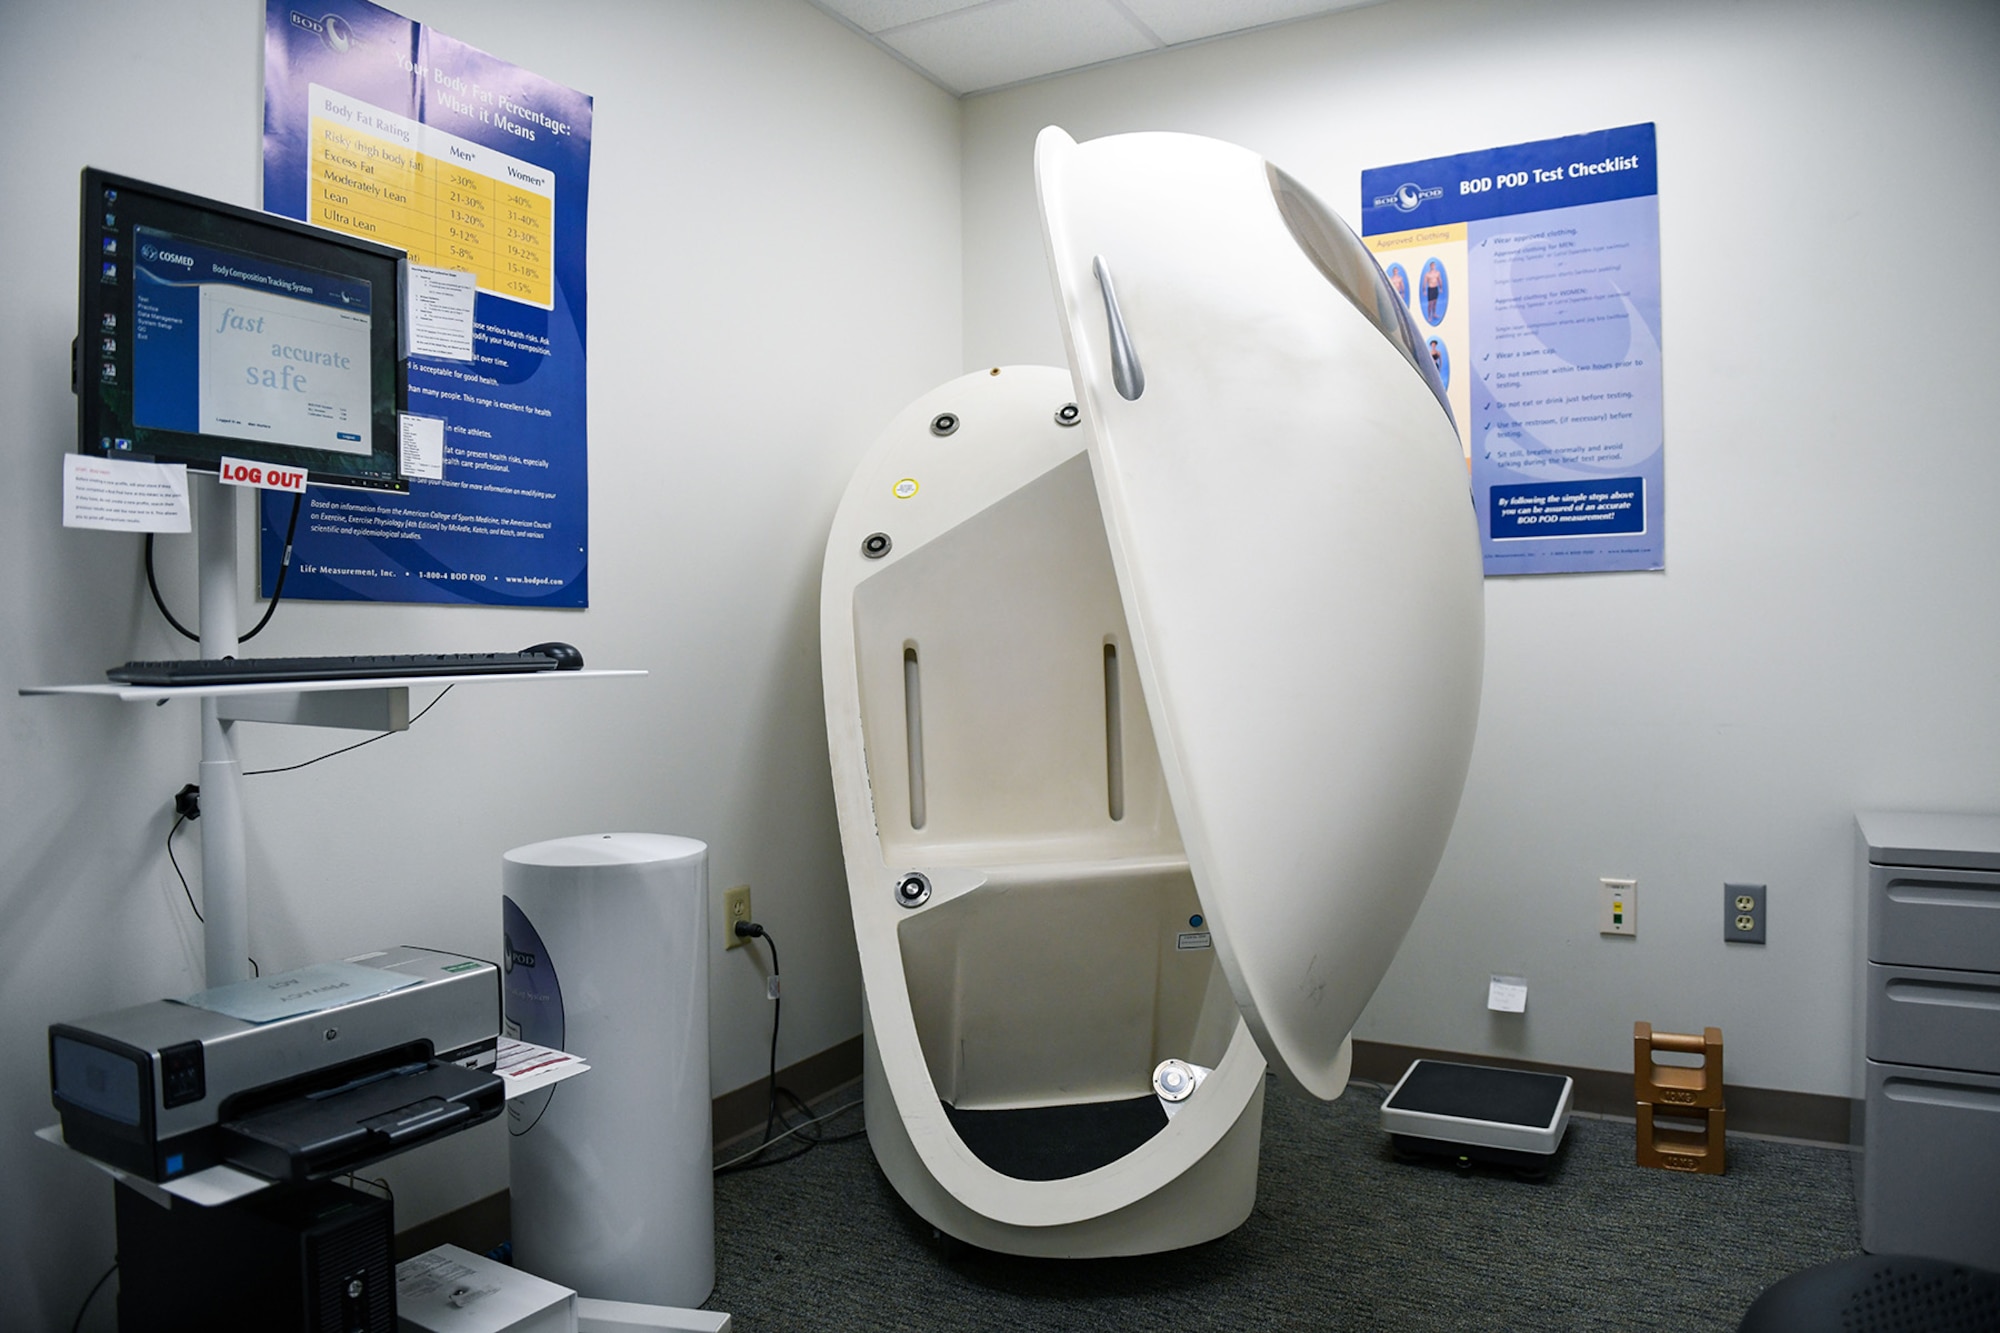 The Body Composition Machine is opened up to reveal the inside, March 5, 2020, at the Human Performance Center at Buckley Air Force Base, Colo.